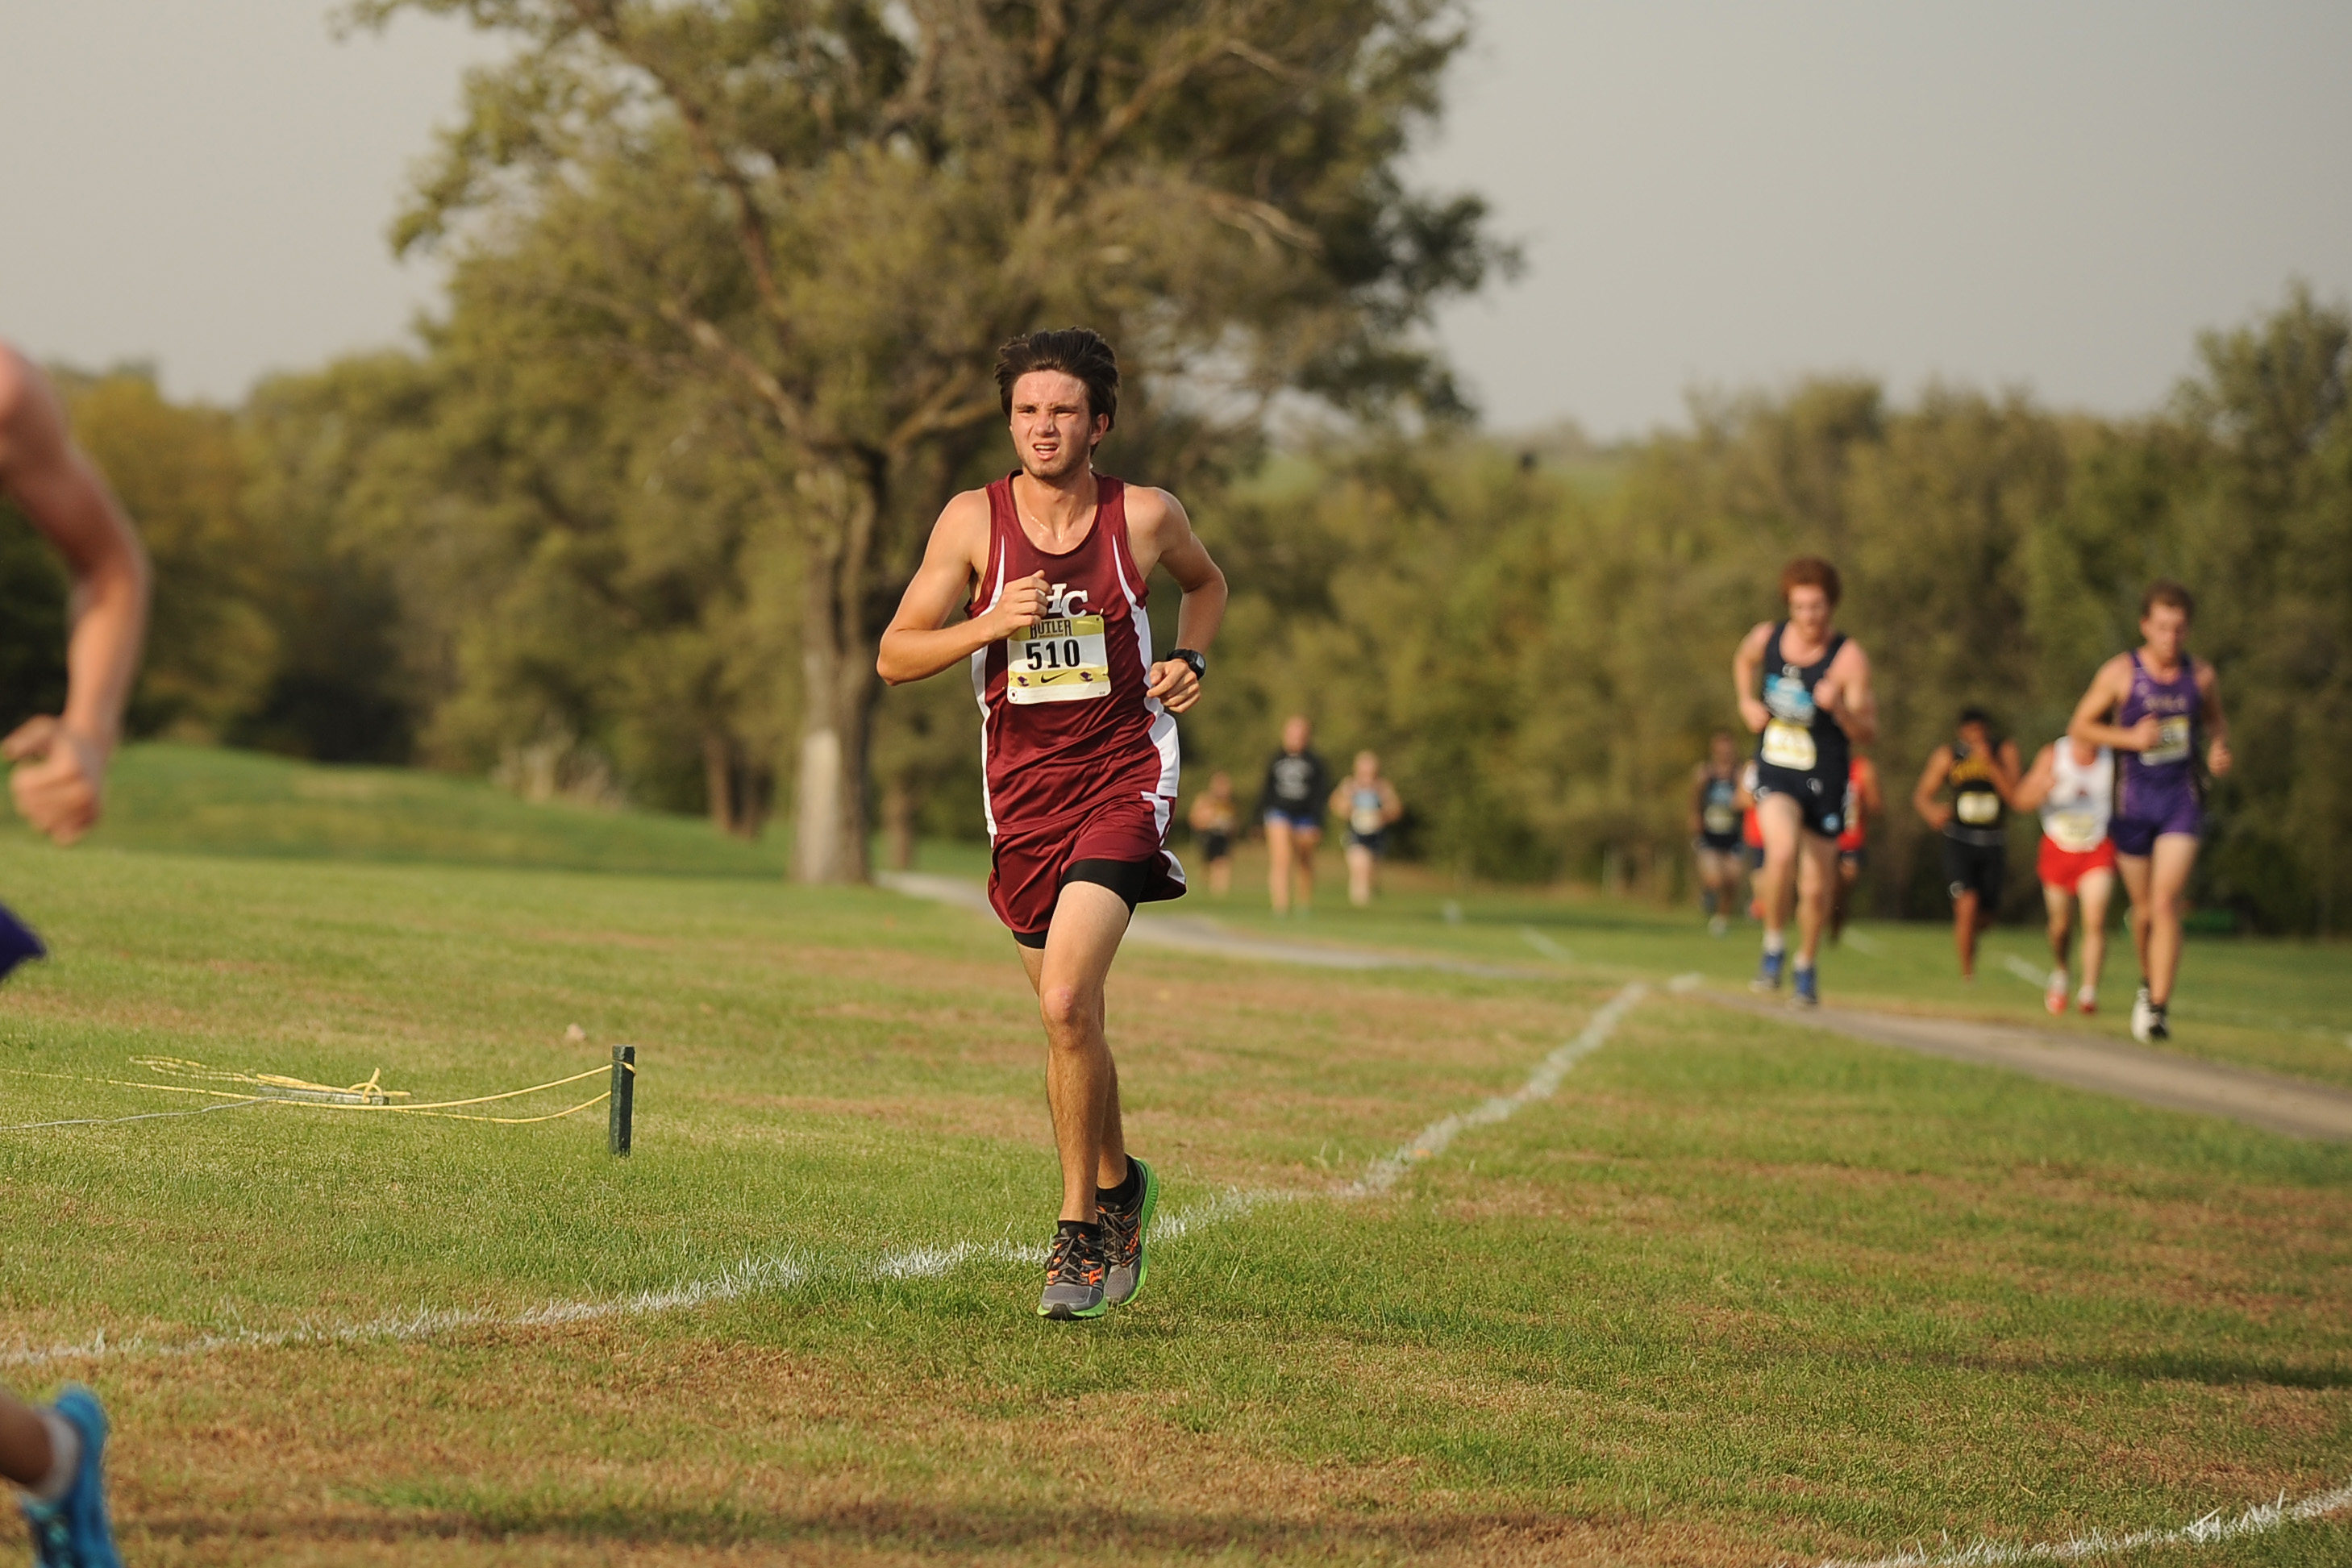 Kyle Good competes in the Butler Invitational at El Dorado. Photo by Larry Bartel